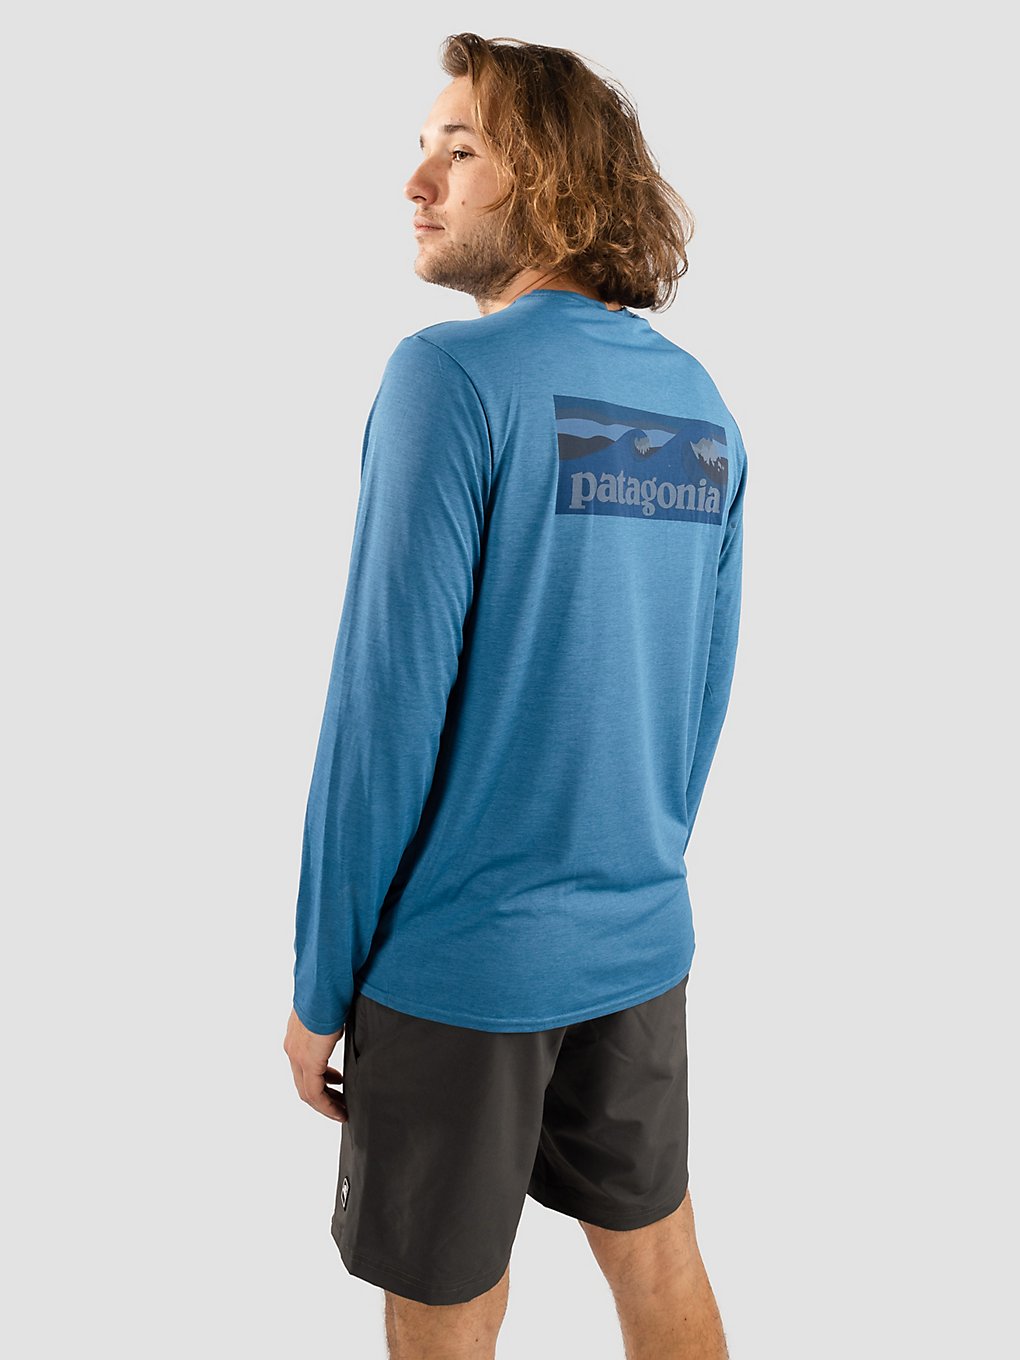 Patagonia petje Cool Daily Graphic Longsleeve blauw